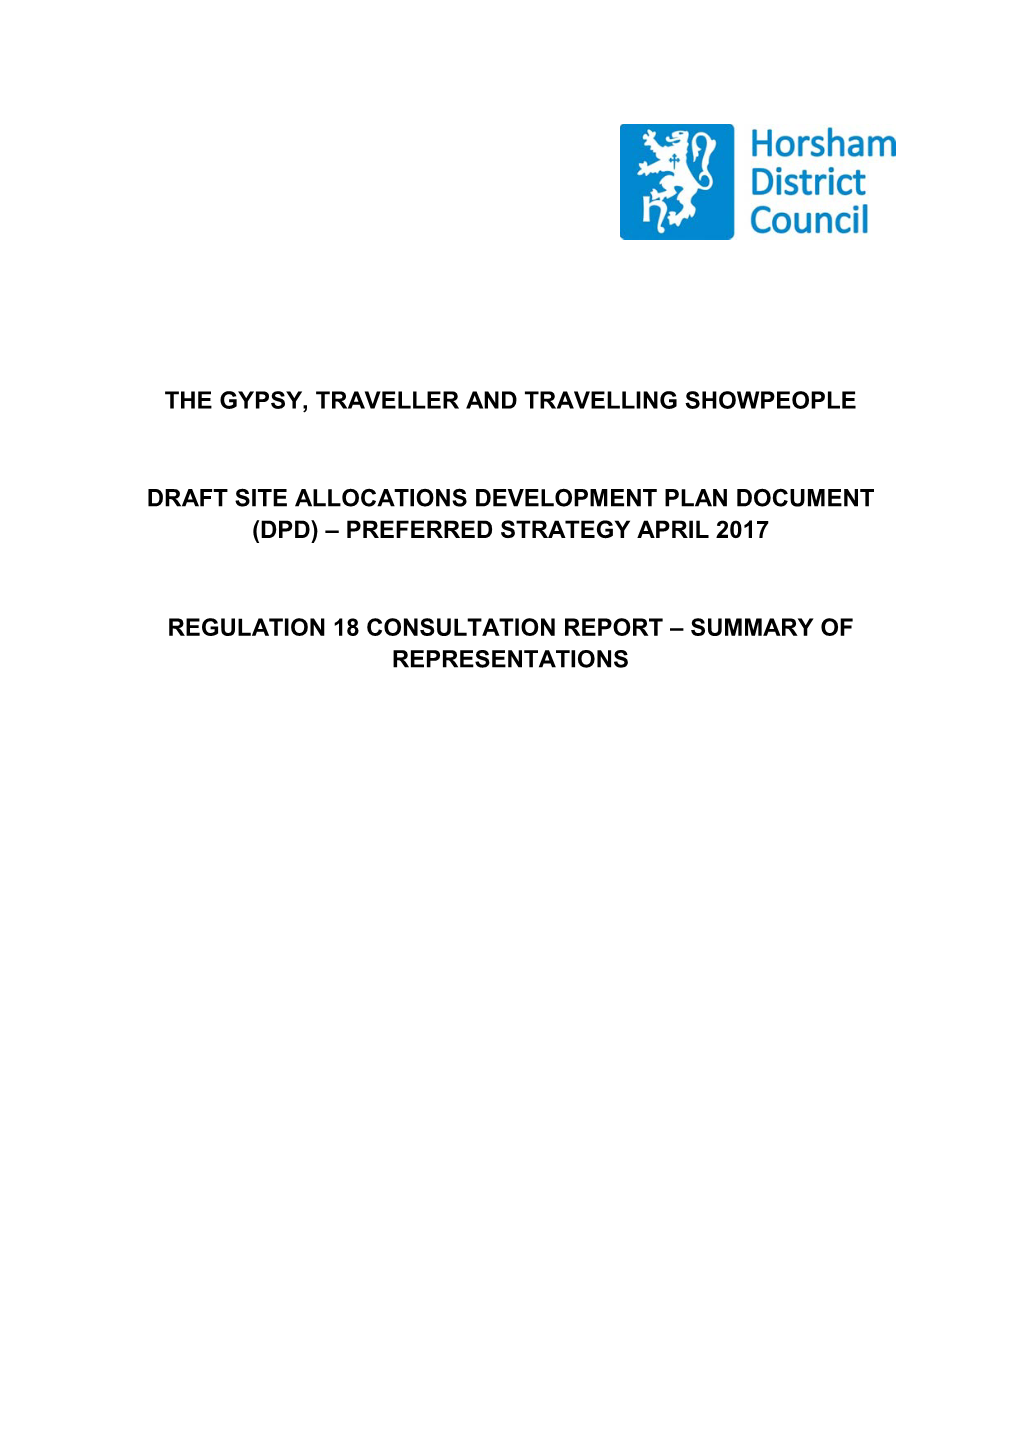 The Gypsy, Traveller and Travelling Showpeople Draft Site Allocations Development Plan Document